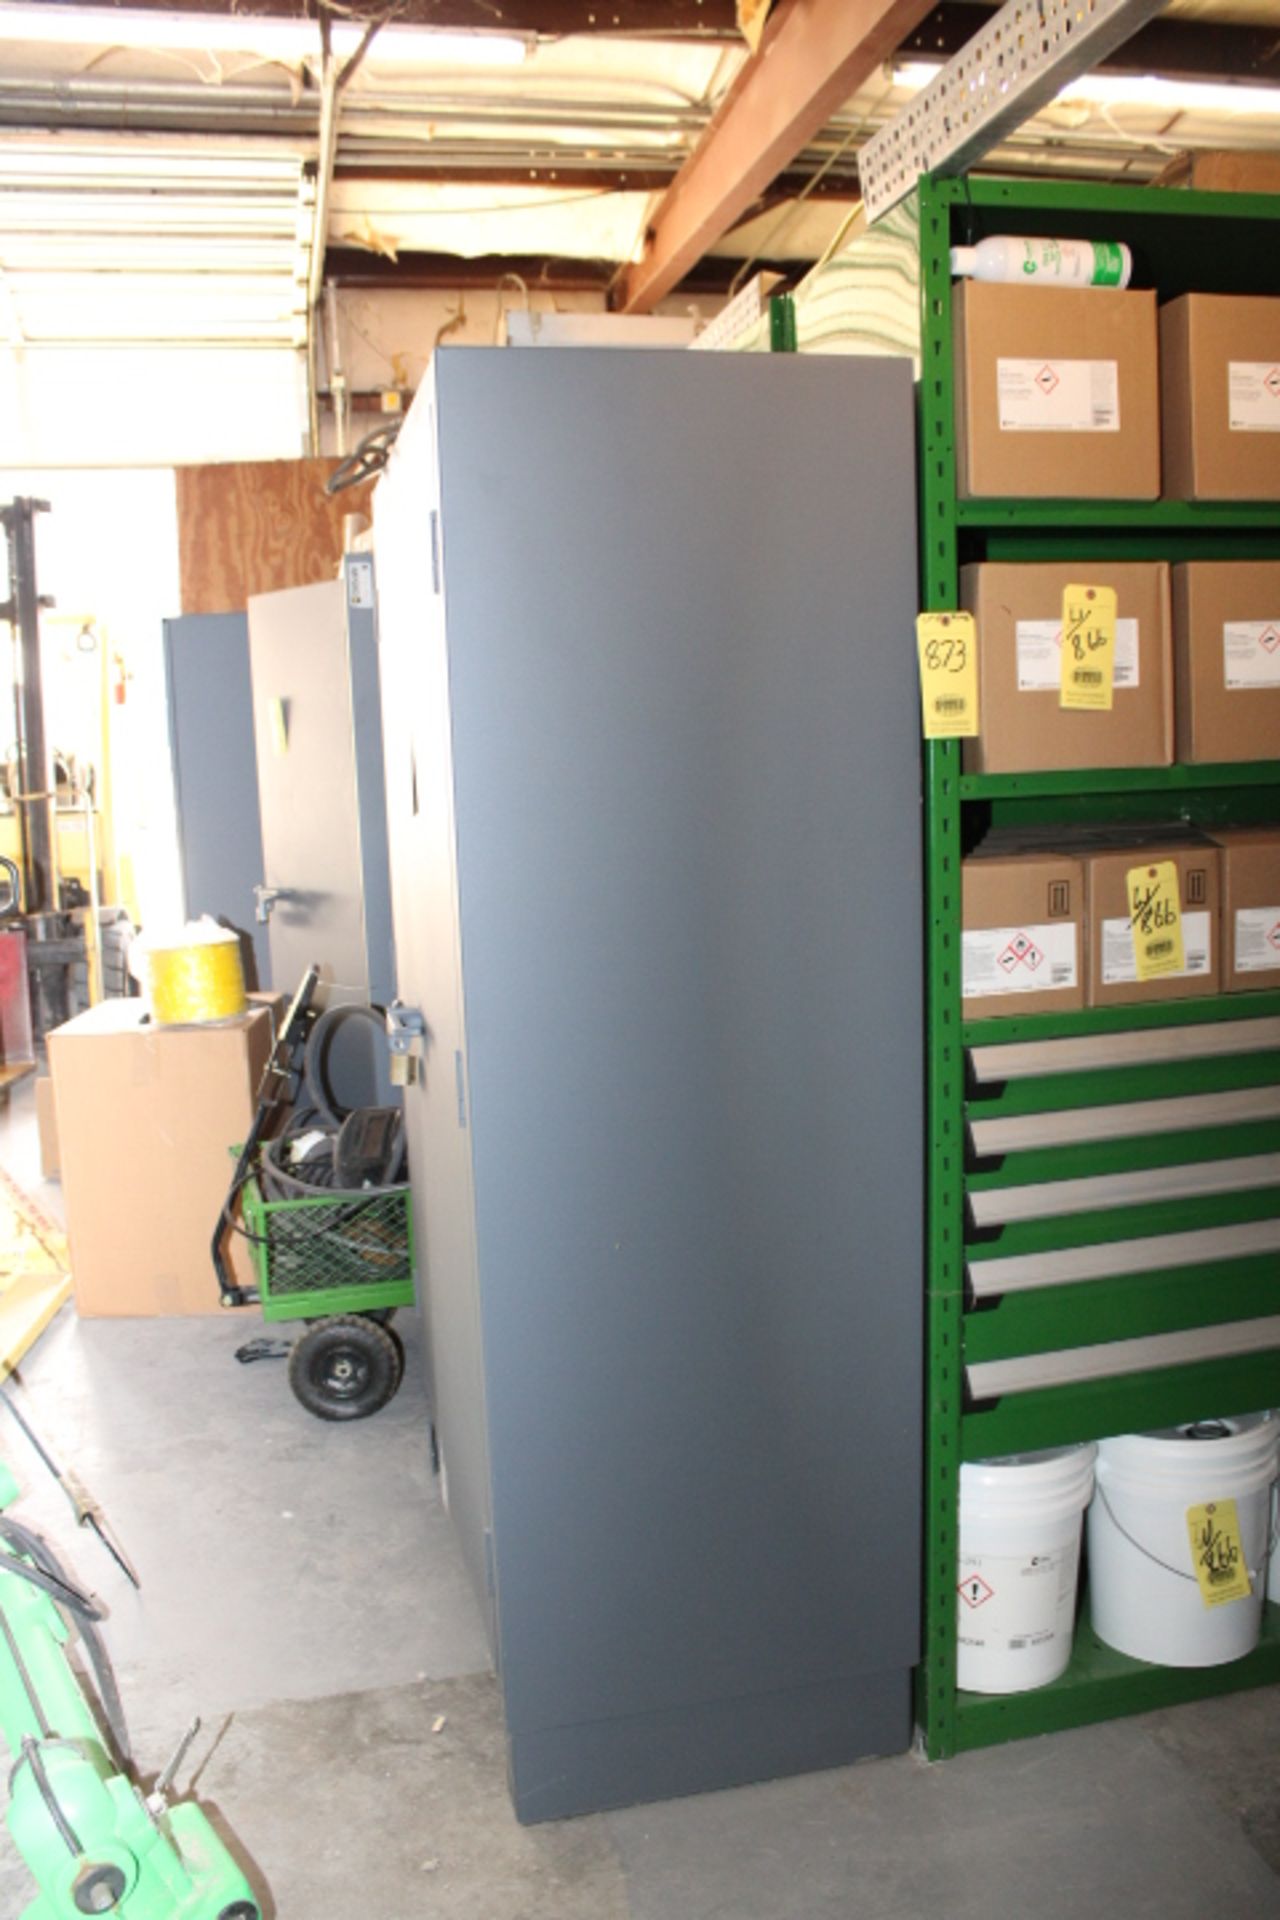 STORAGE CABINET, GLOBAL, H.D., 48"W. x 78" ht. x 24" dp, (4) shelves (delayed removal) (contents not - Image 2 of 3